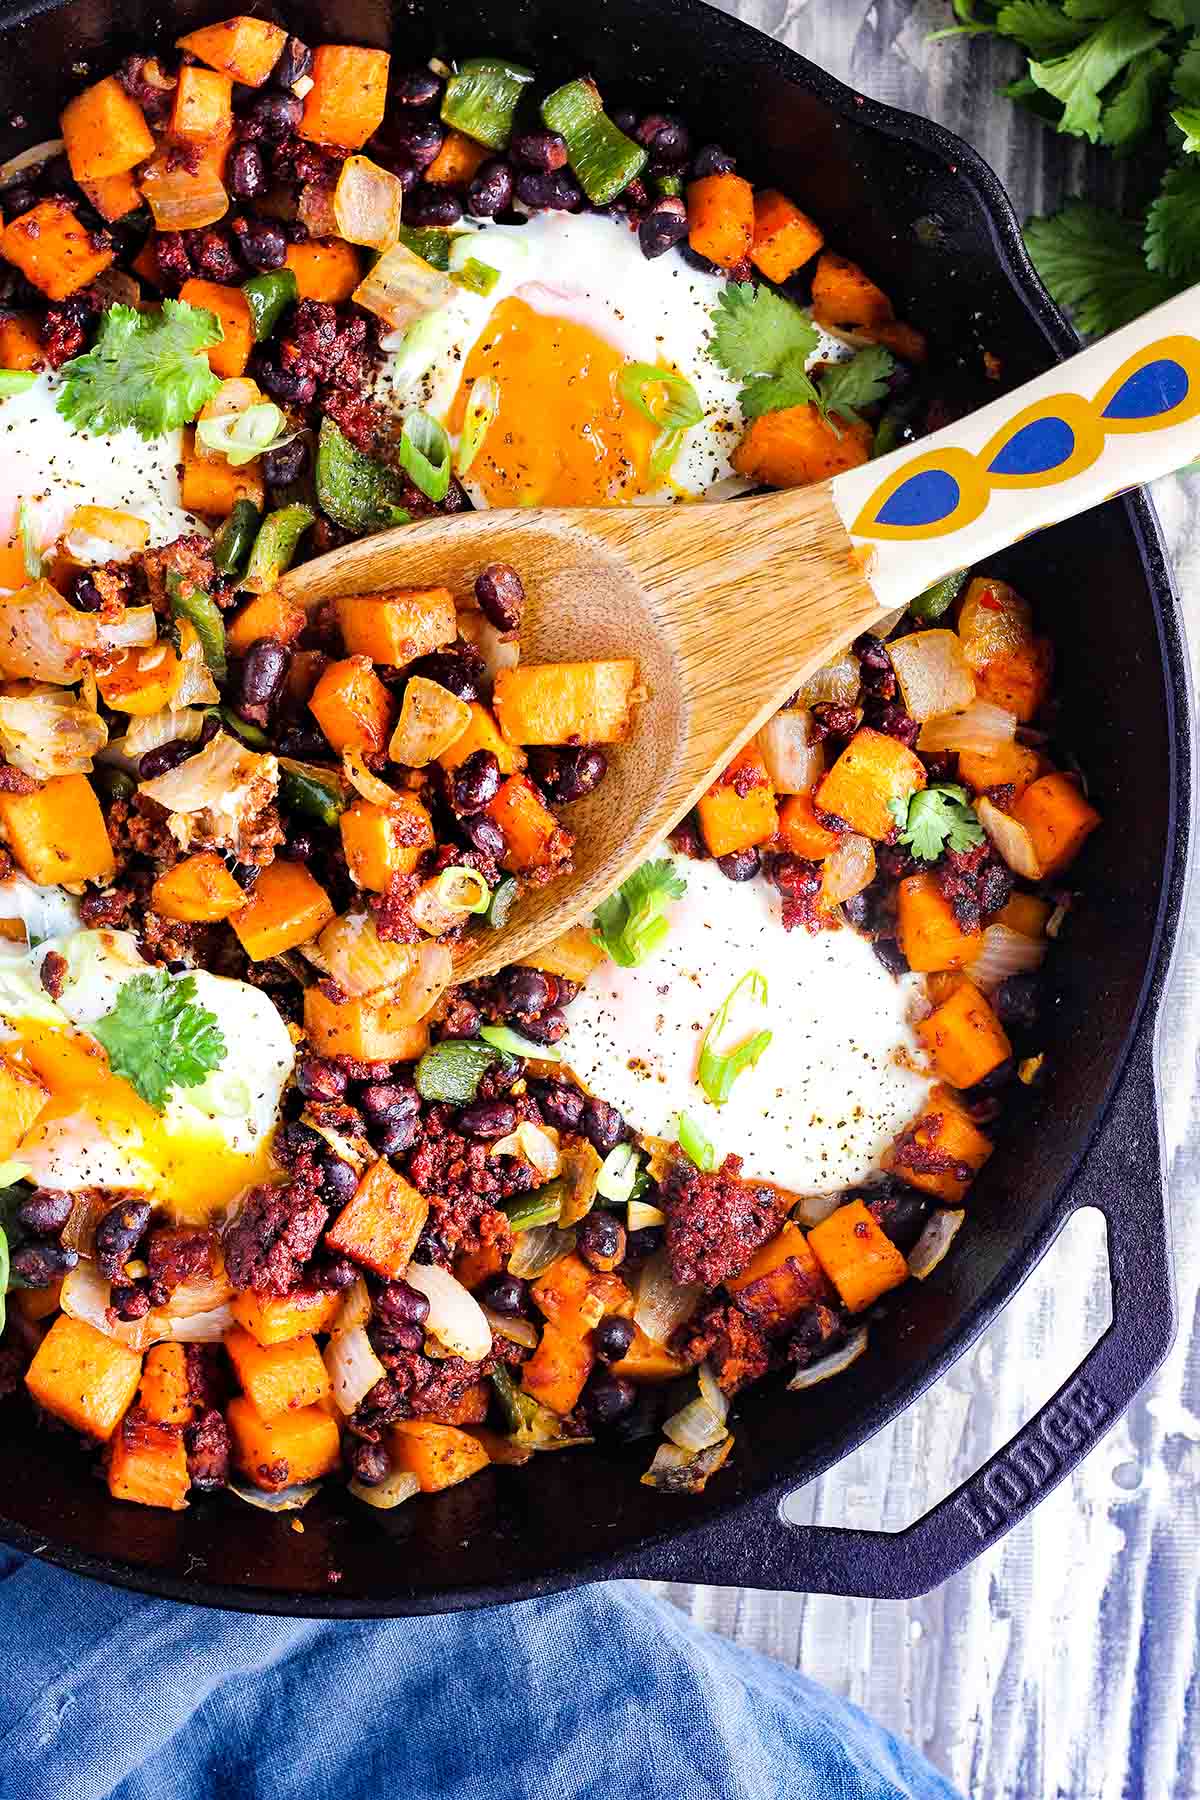 Sweet potato hash in skillet with serving spoon.